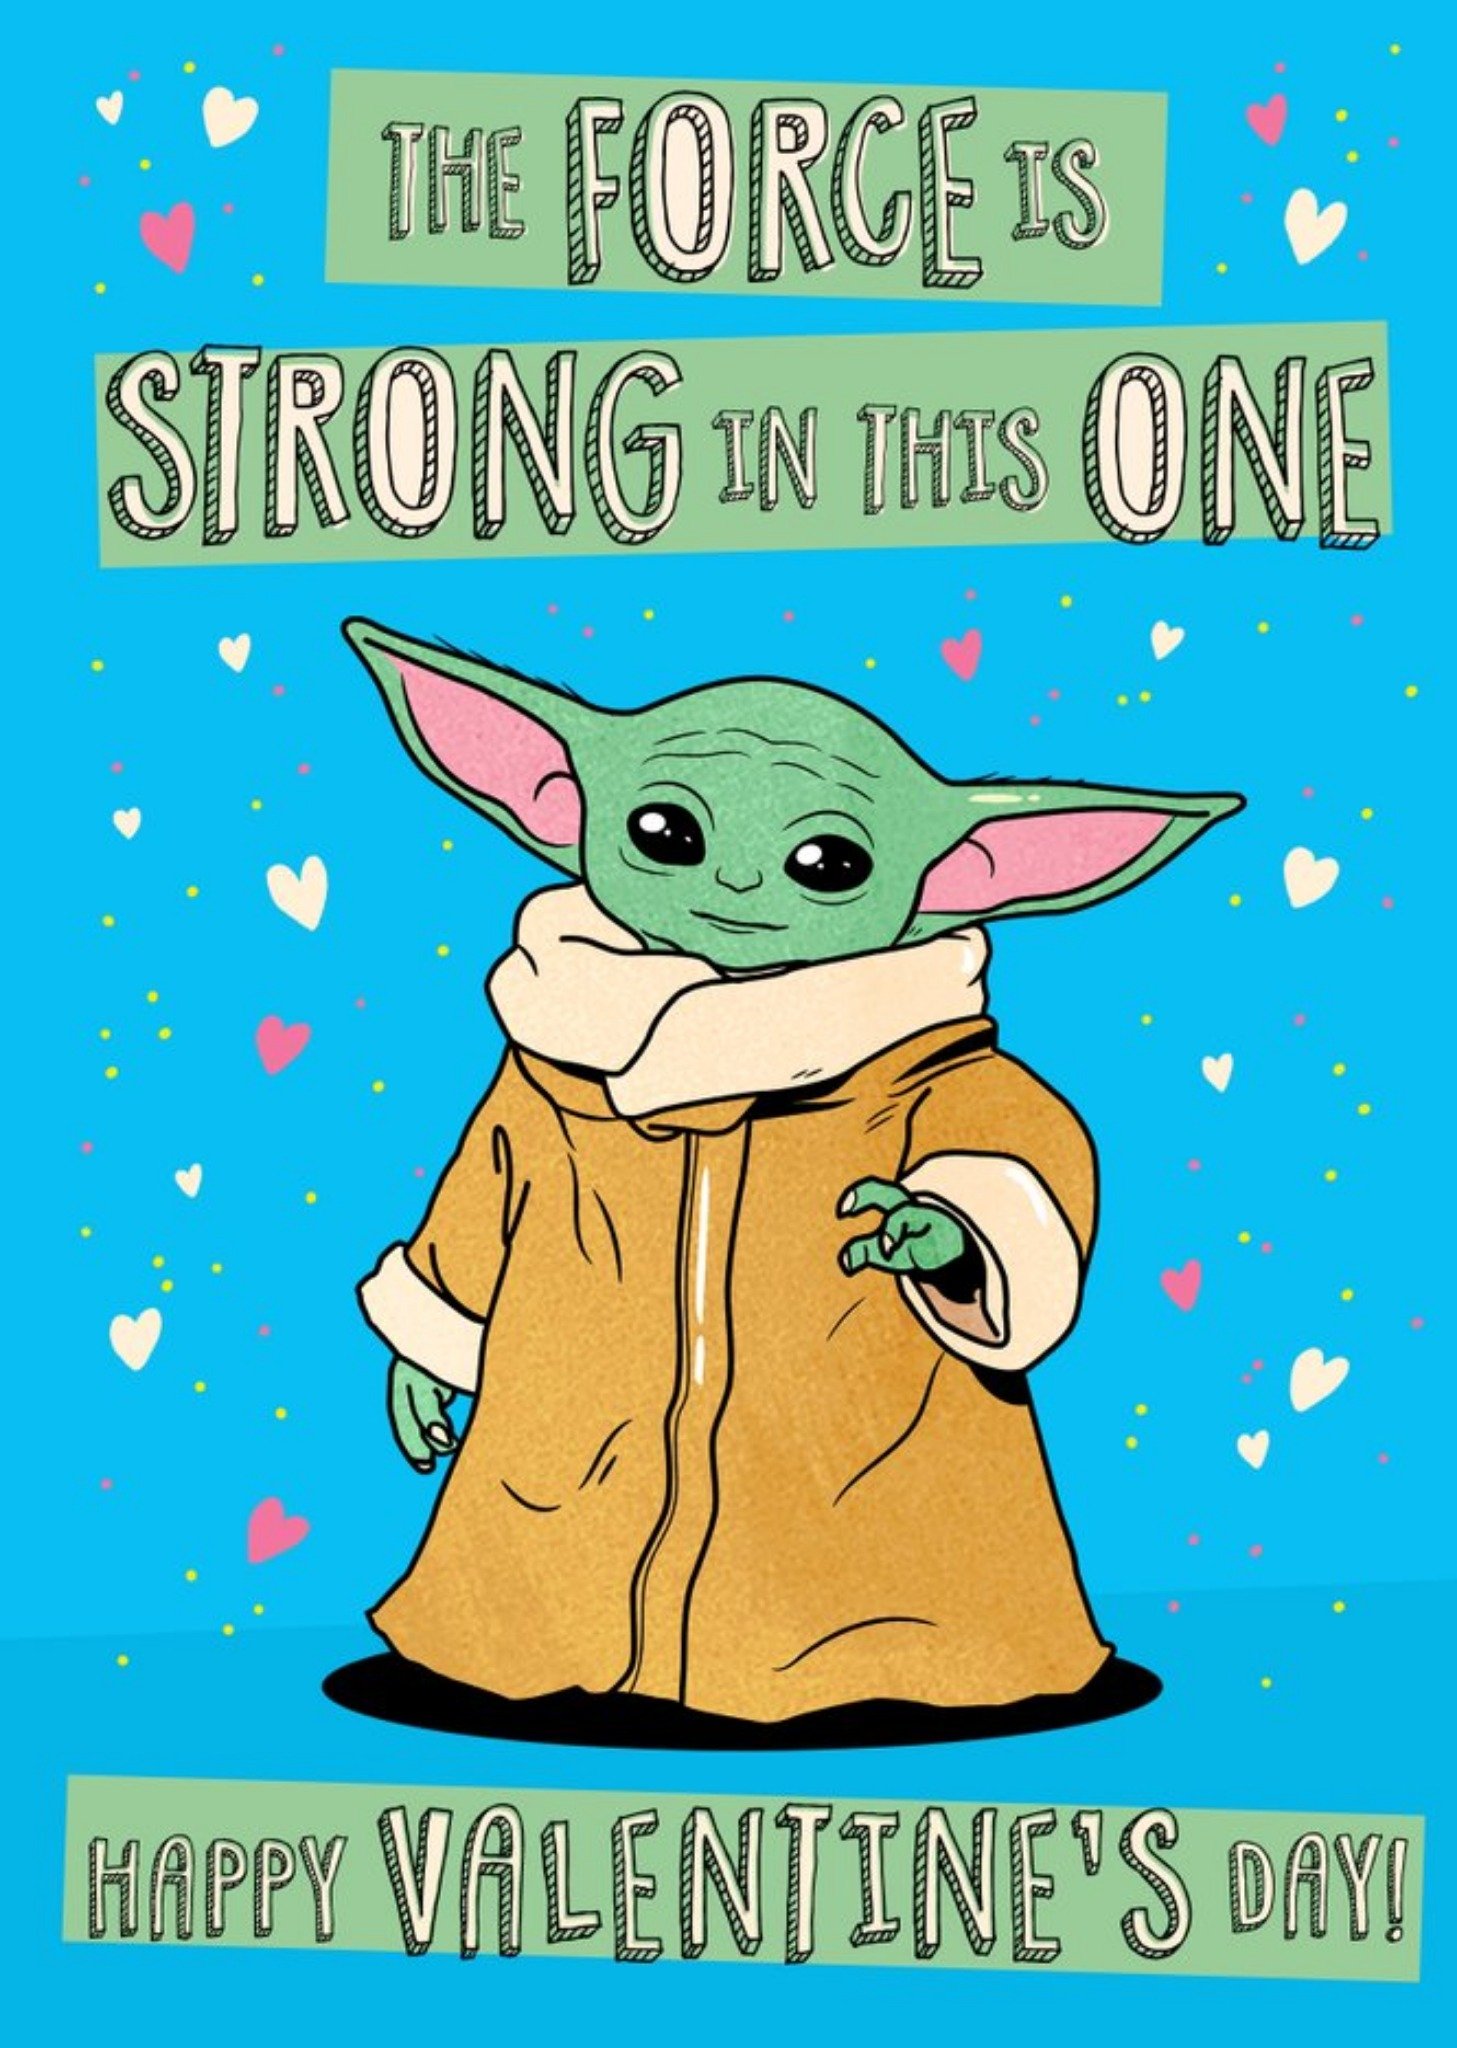 Disney Star Wars The Mandalorian Force Is Strong Baby Yoda Valentine's Card, Large